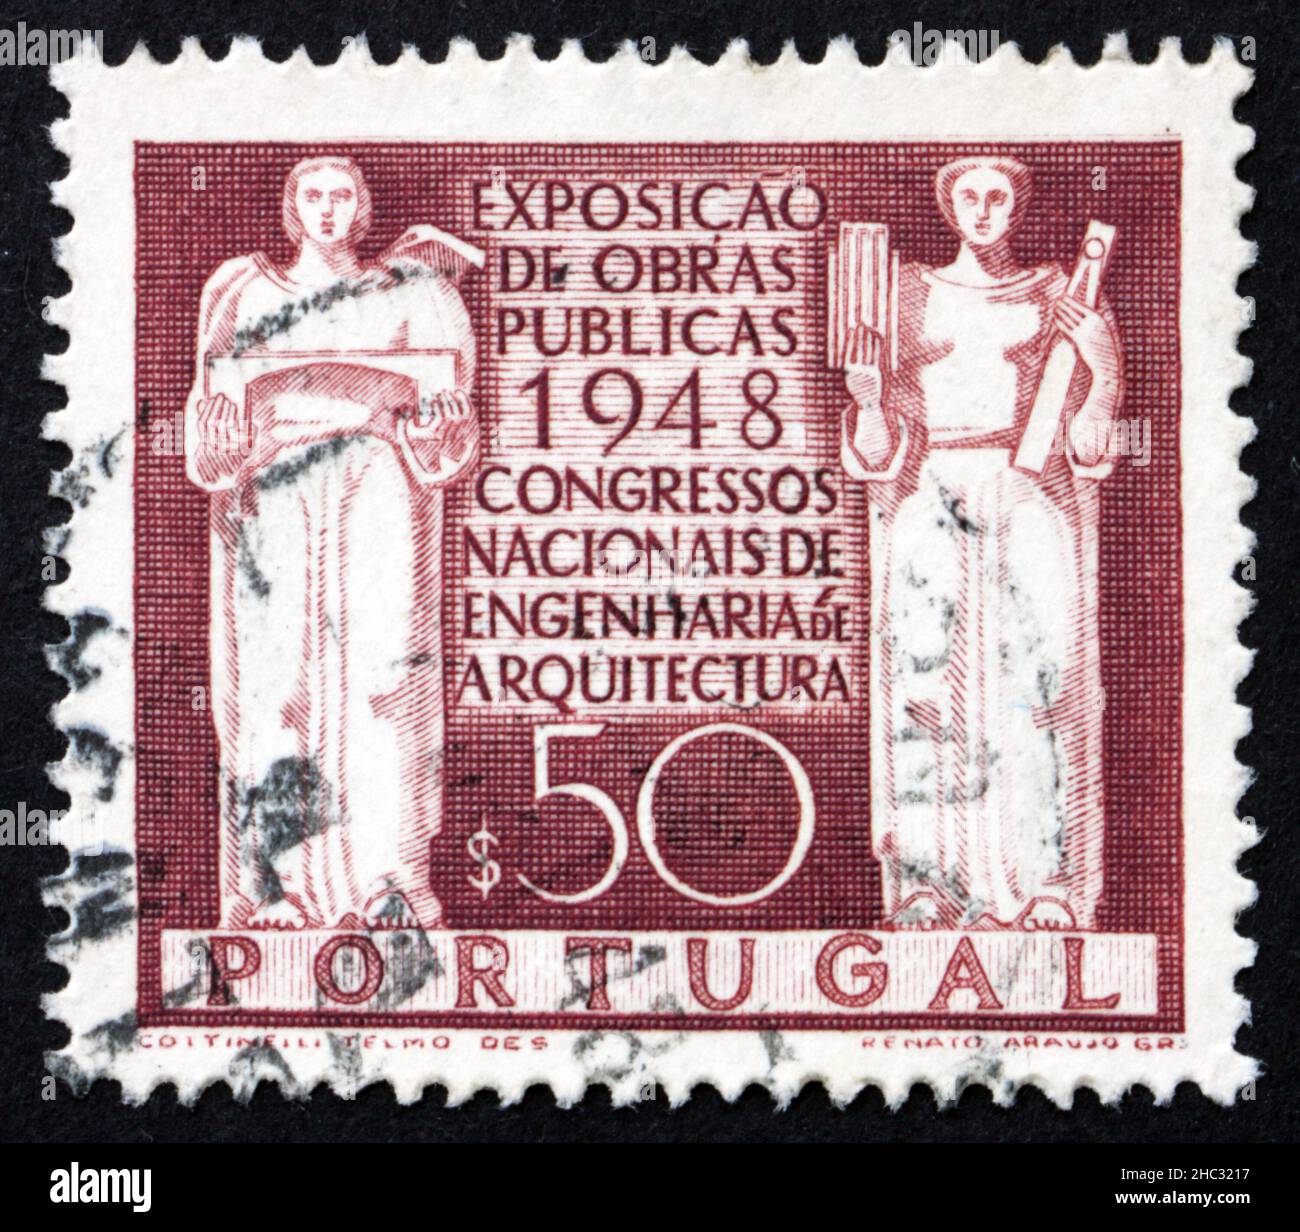 PORTUGAL - CIRCA 1948: a stamp printed in the Portugal shows Architecture and Engineering, Exposition of Public Works and National Congress of Enginee Stock Photo